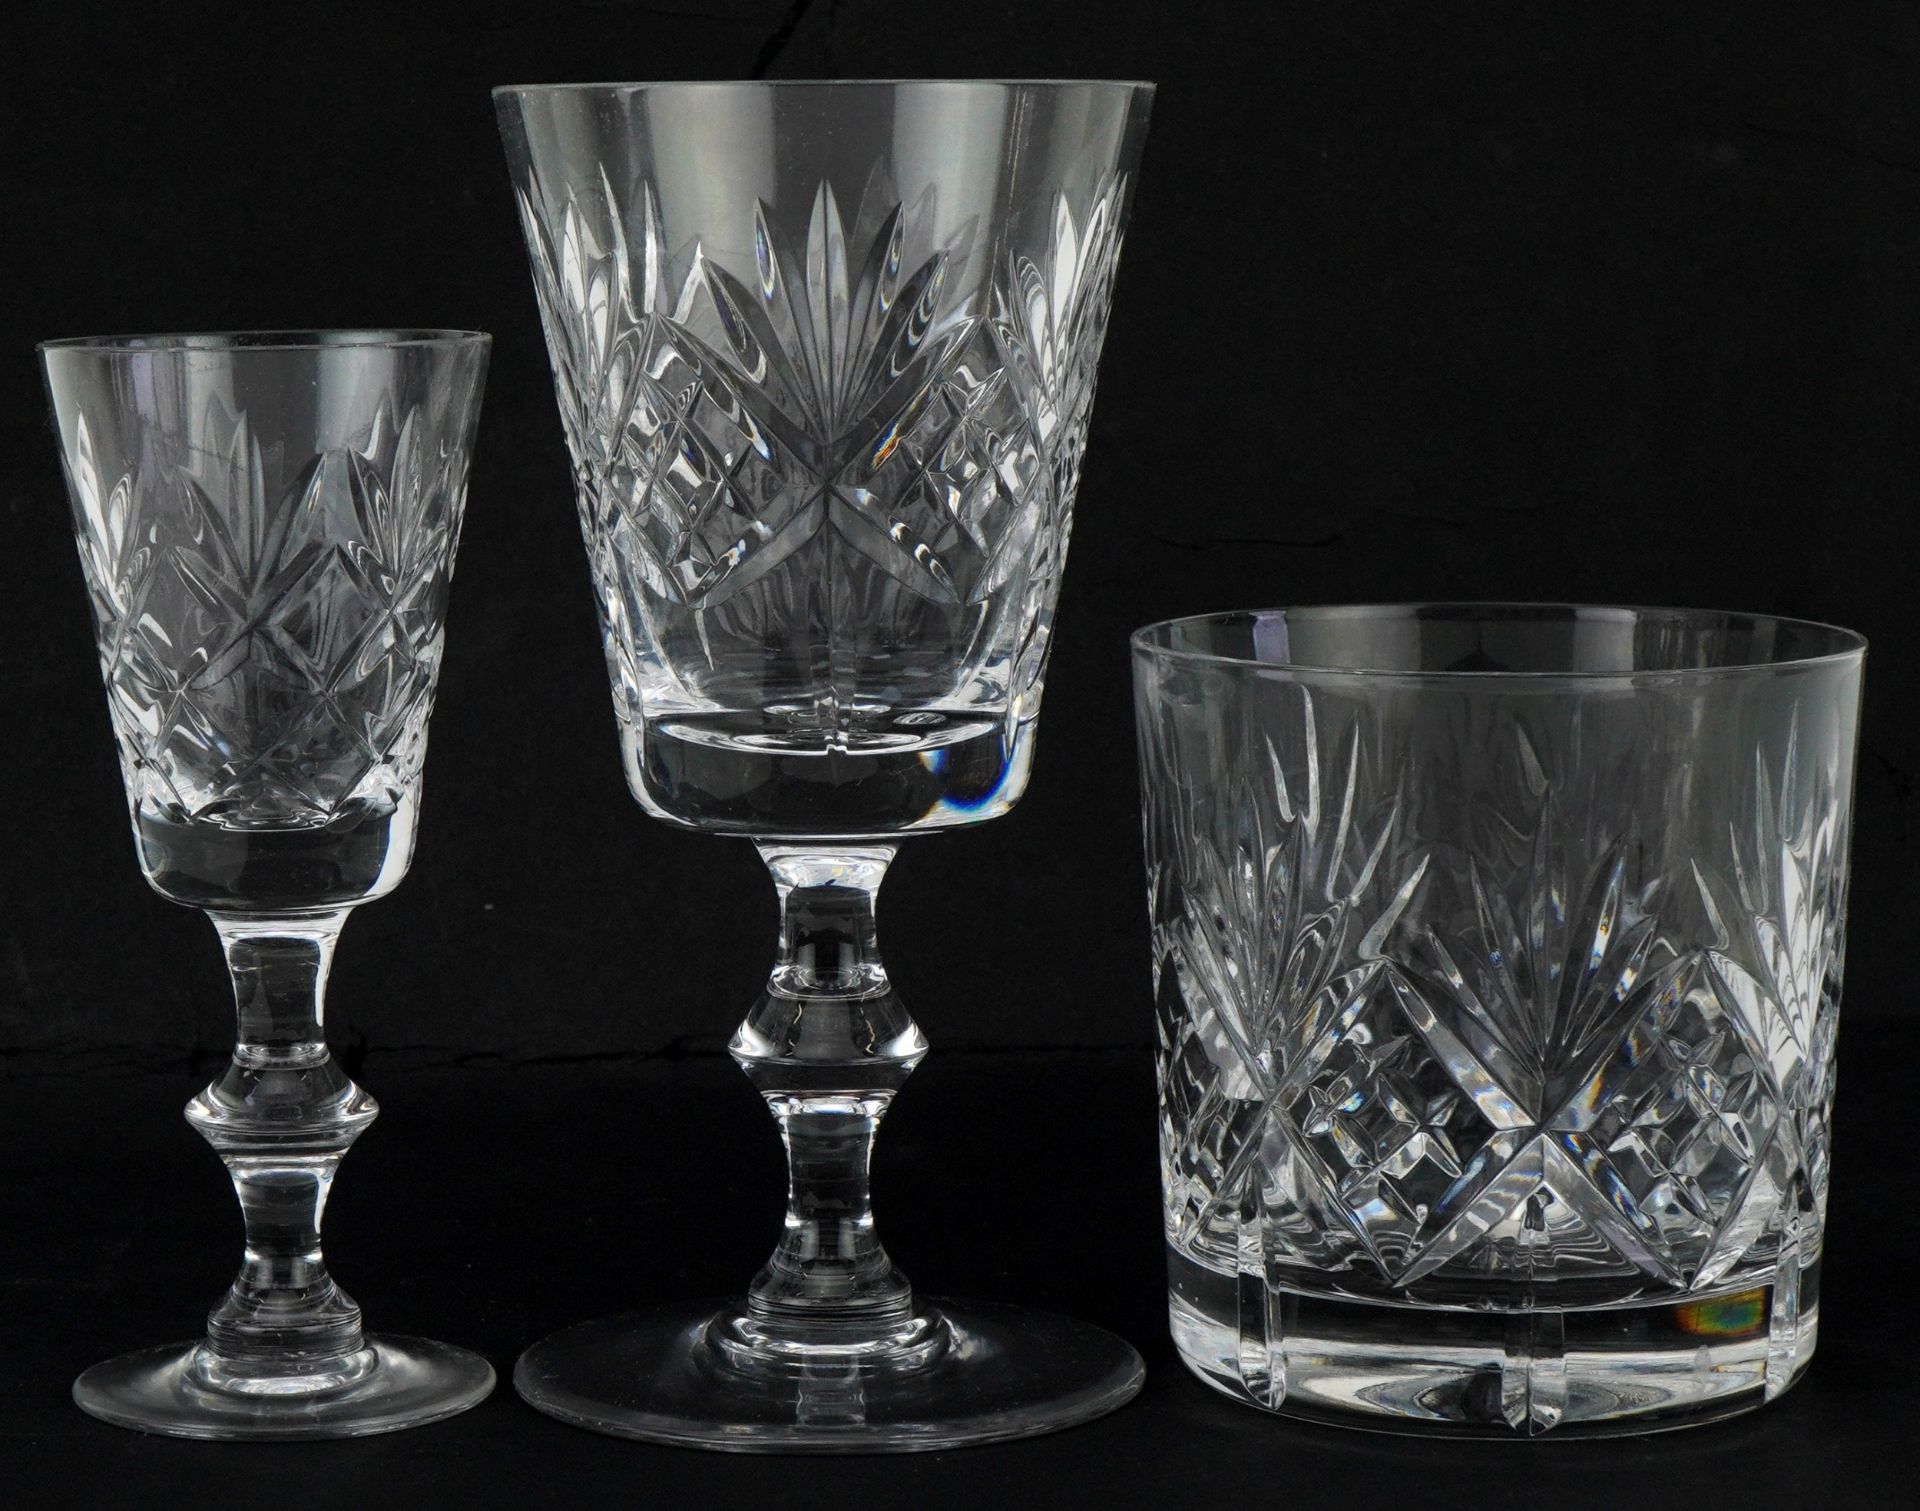 Edinburgh Crystal glassware boxed sets including set of six tumblers and set of six sherry glasses - Image 4 of 7